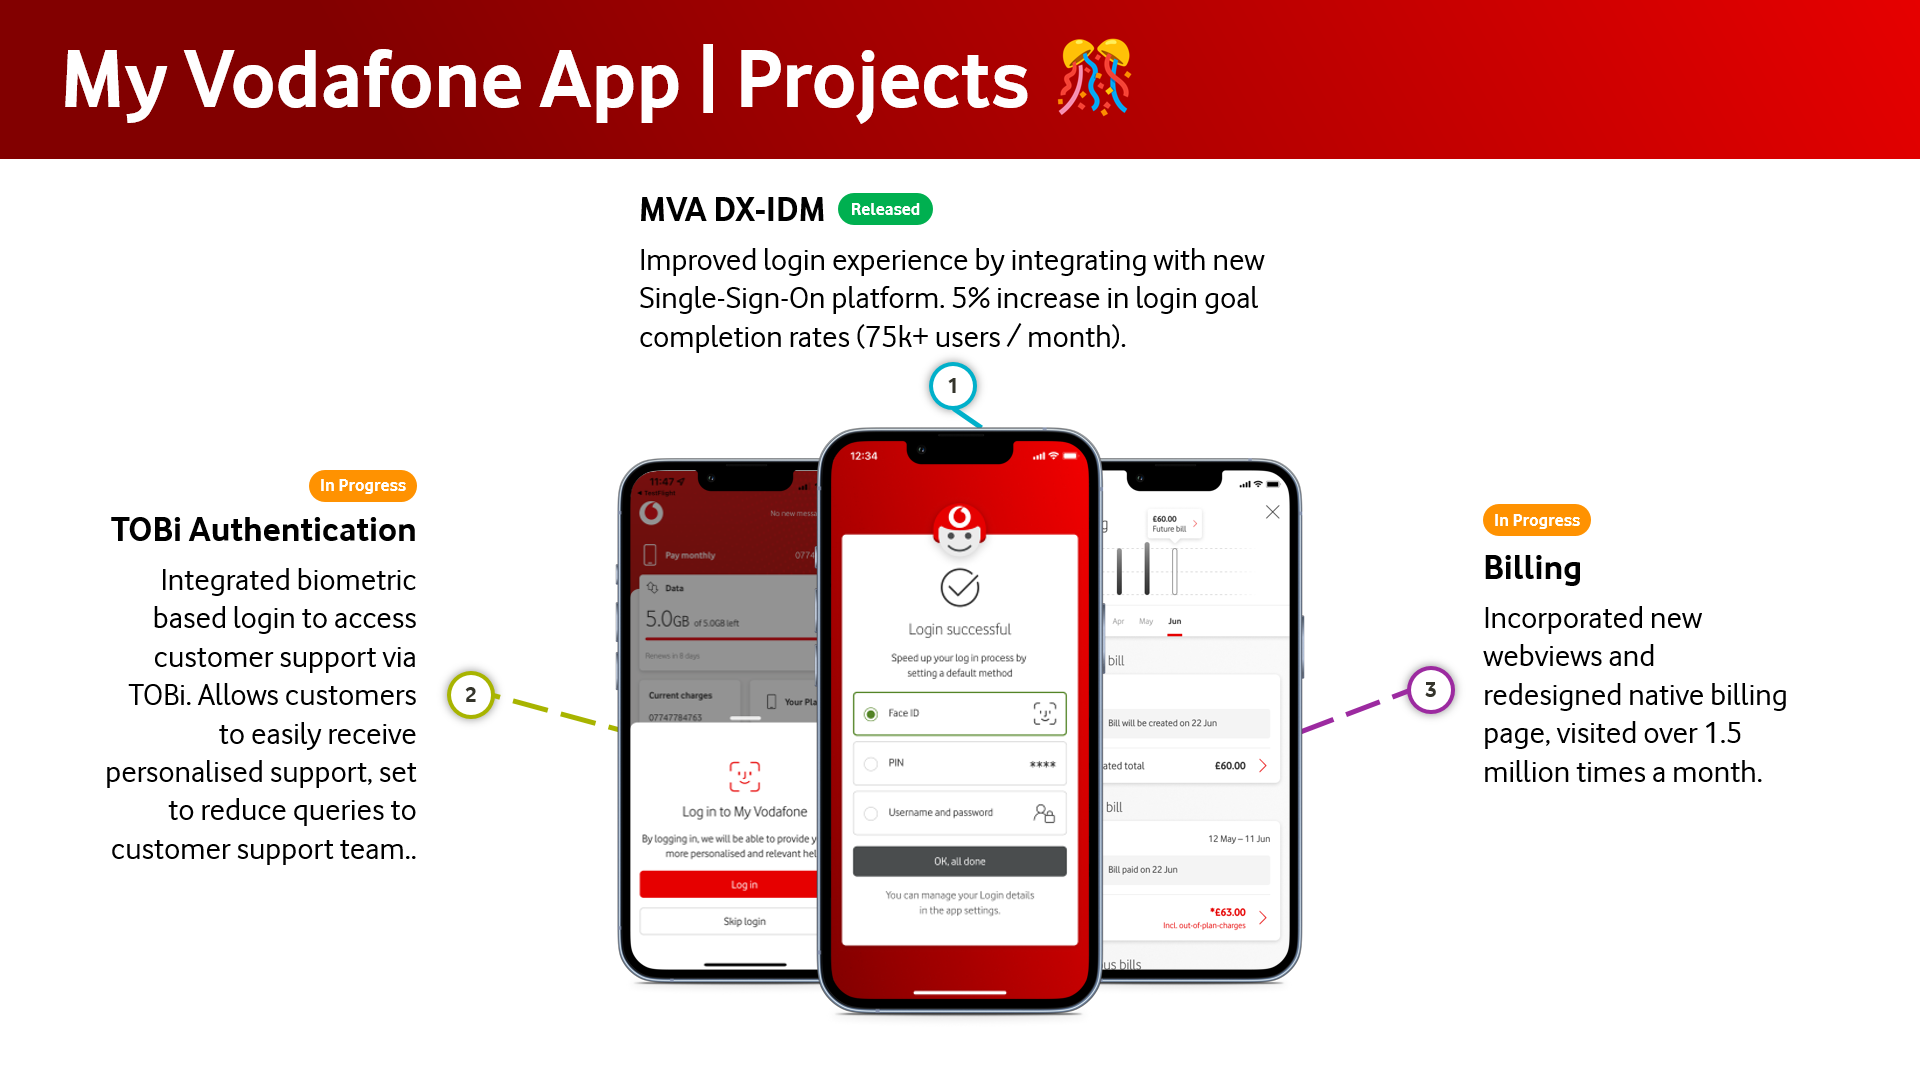 My Vodafone App Projects